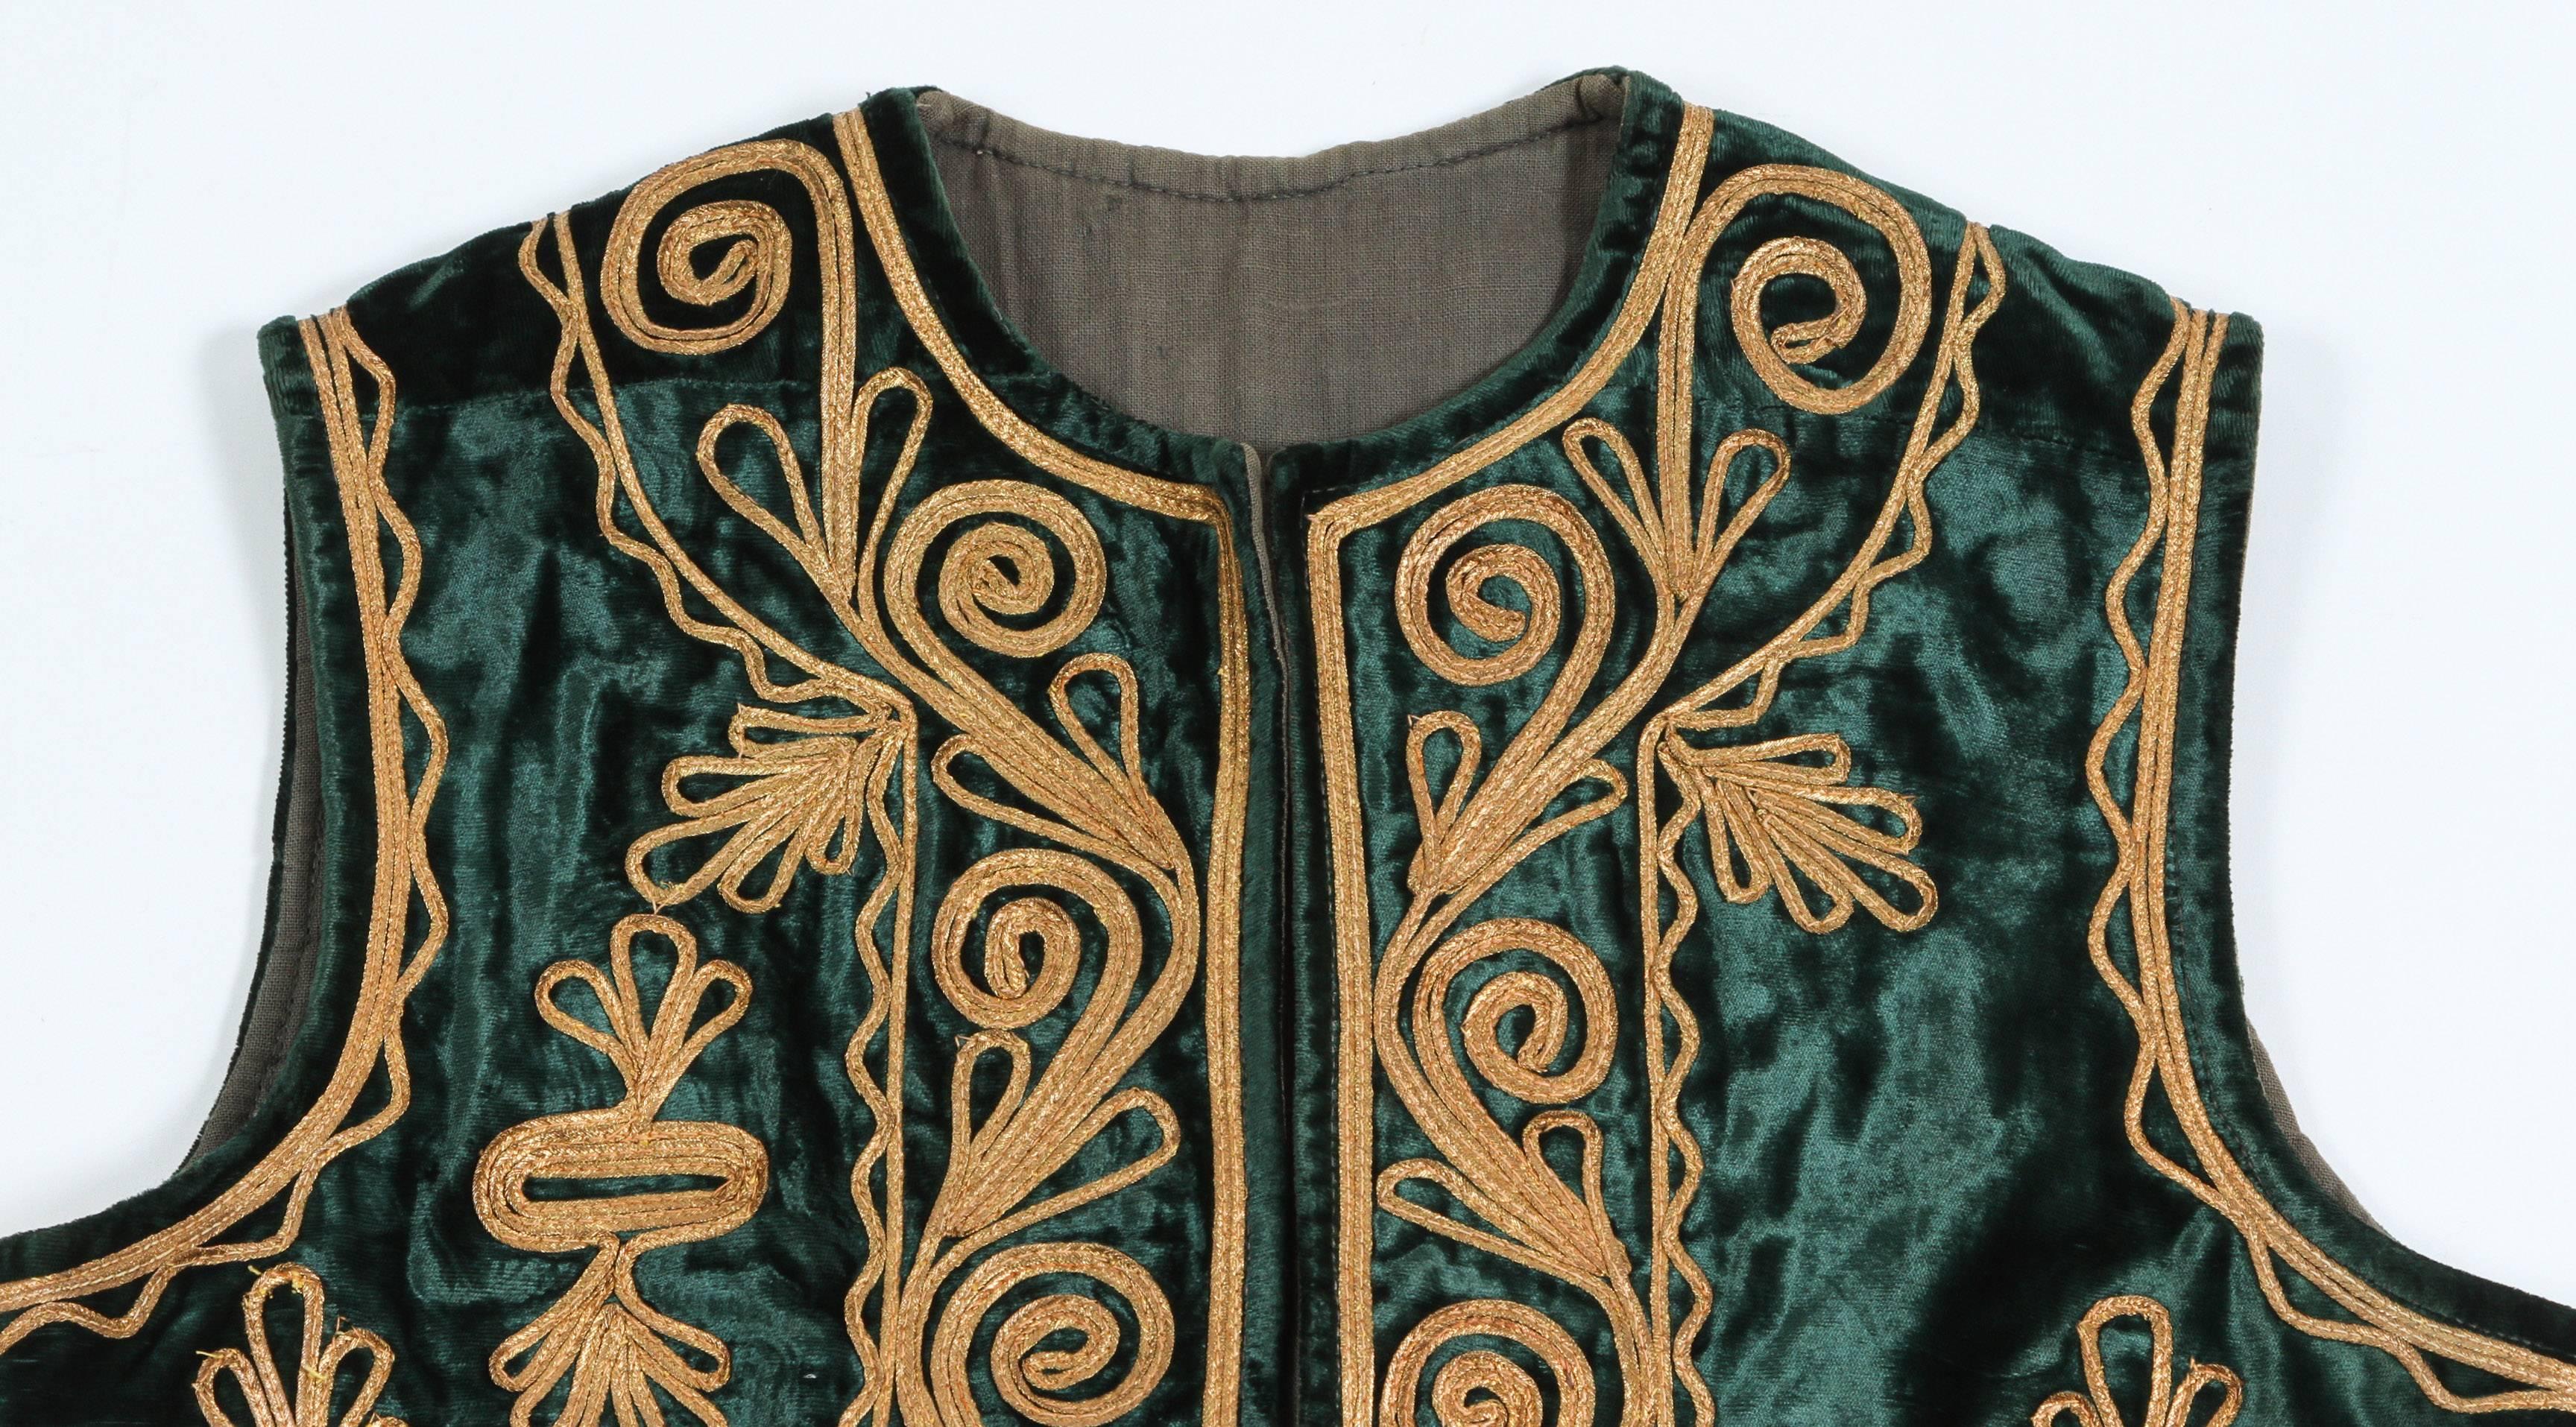 Authentic ottoman Turkish vest in green velvet decorated with elaborate gold thread,
Part of the traditional Turkish folk costume.
Great gift for him, Father's Day.
Measurements:
height: 21.5